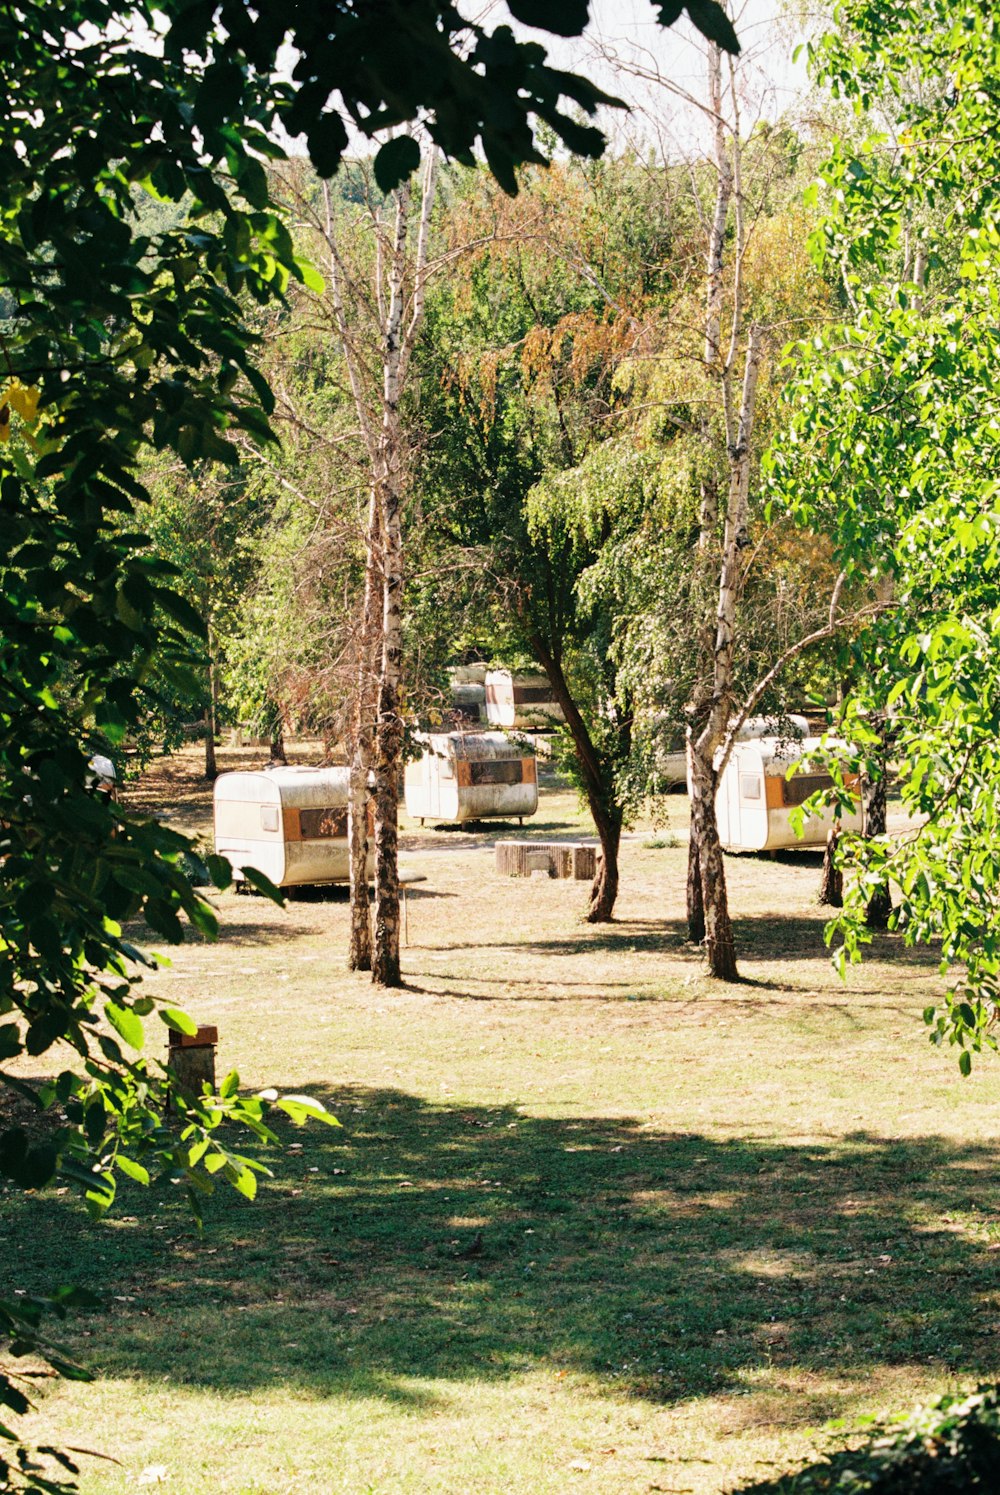 a group of campers parked in a wooded area